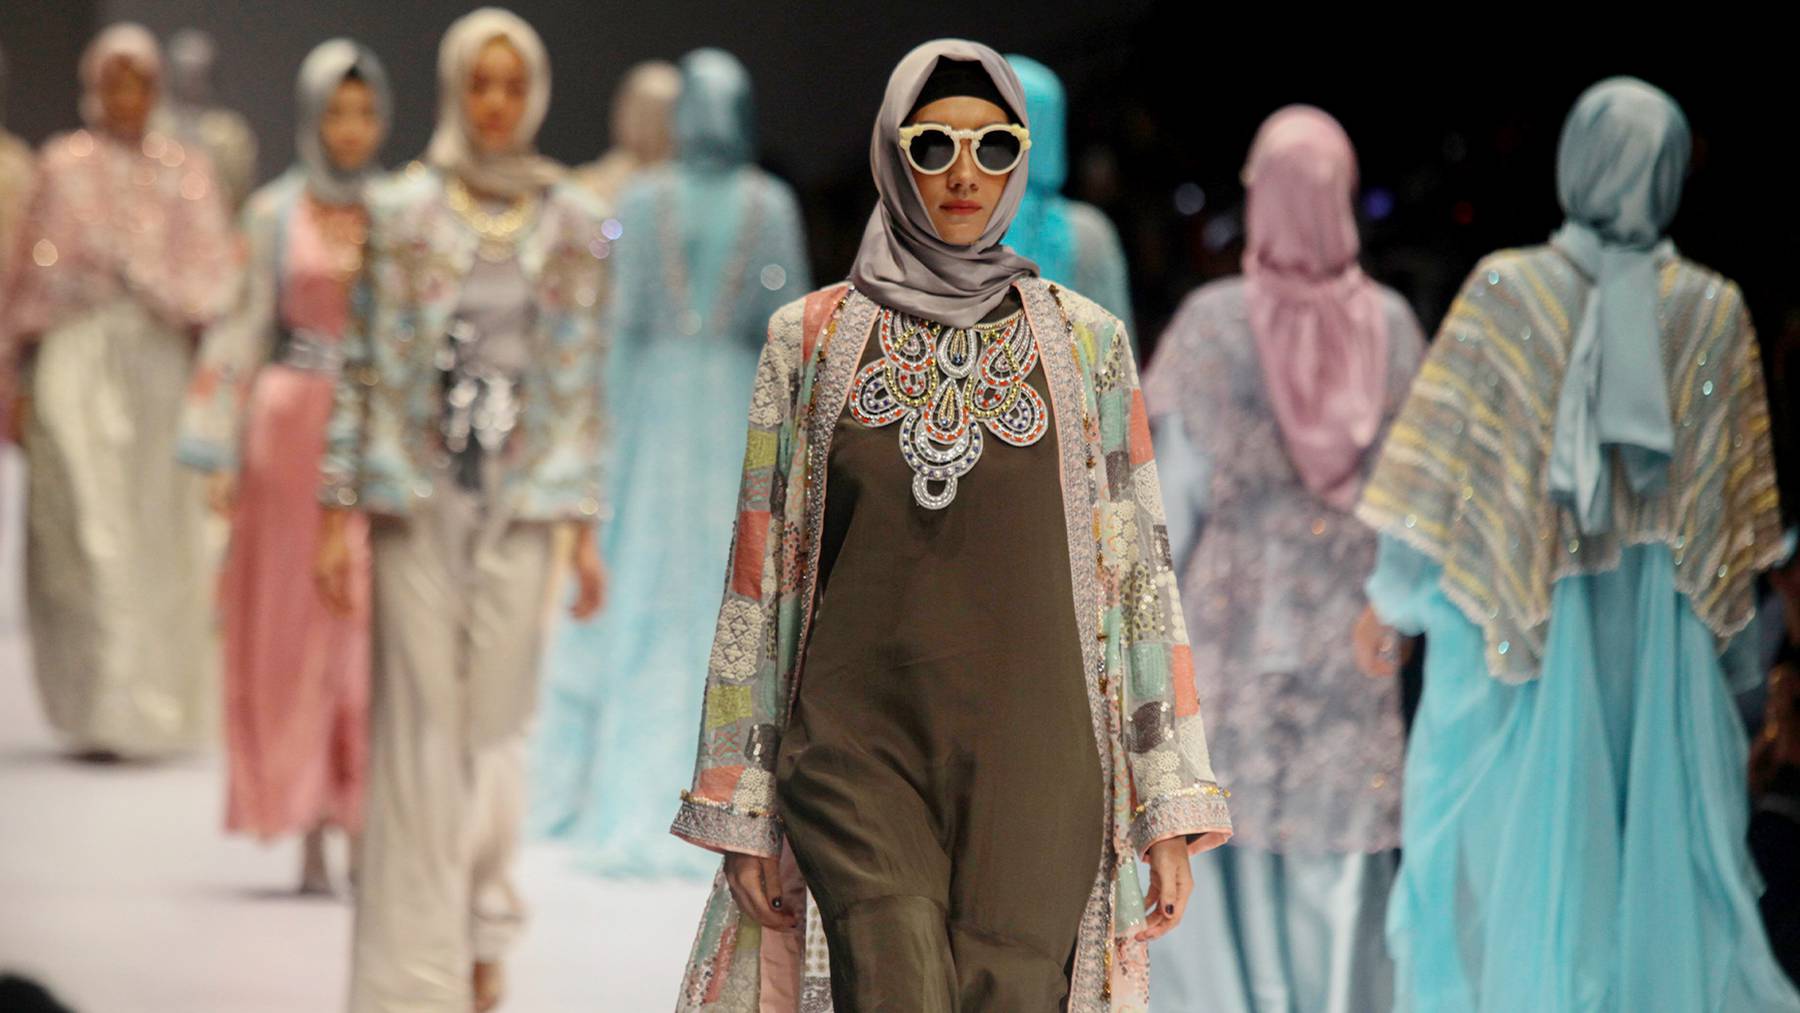 A model on the runway wearing Indonesian modest fashion designer, Anniesa Hasibuan during Jakarta Fashion Week in October, 2016. Getty Images.